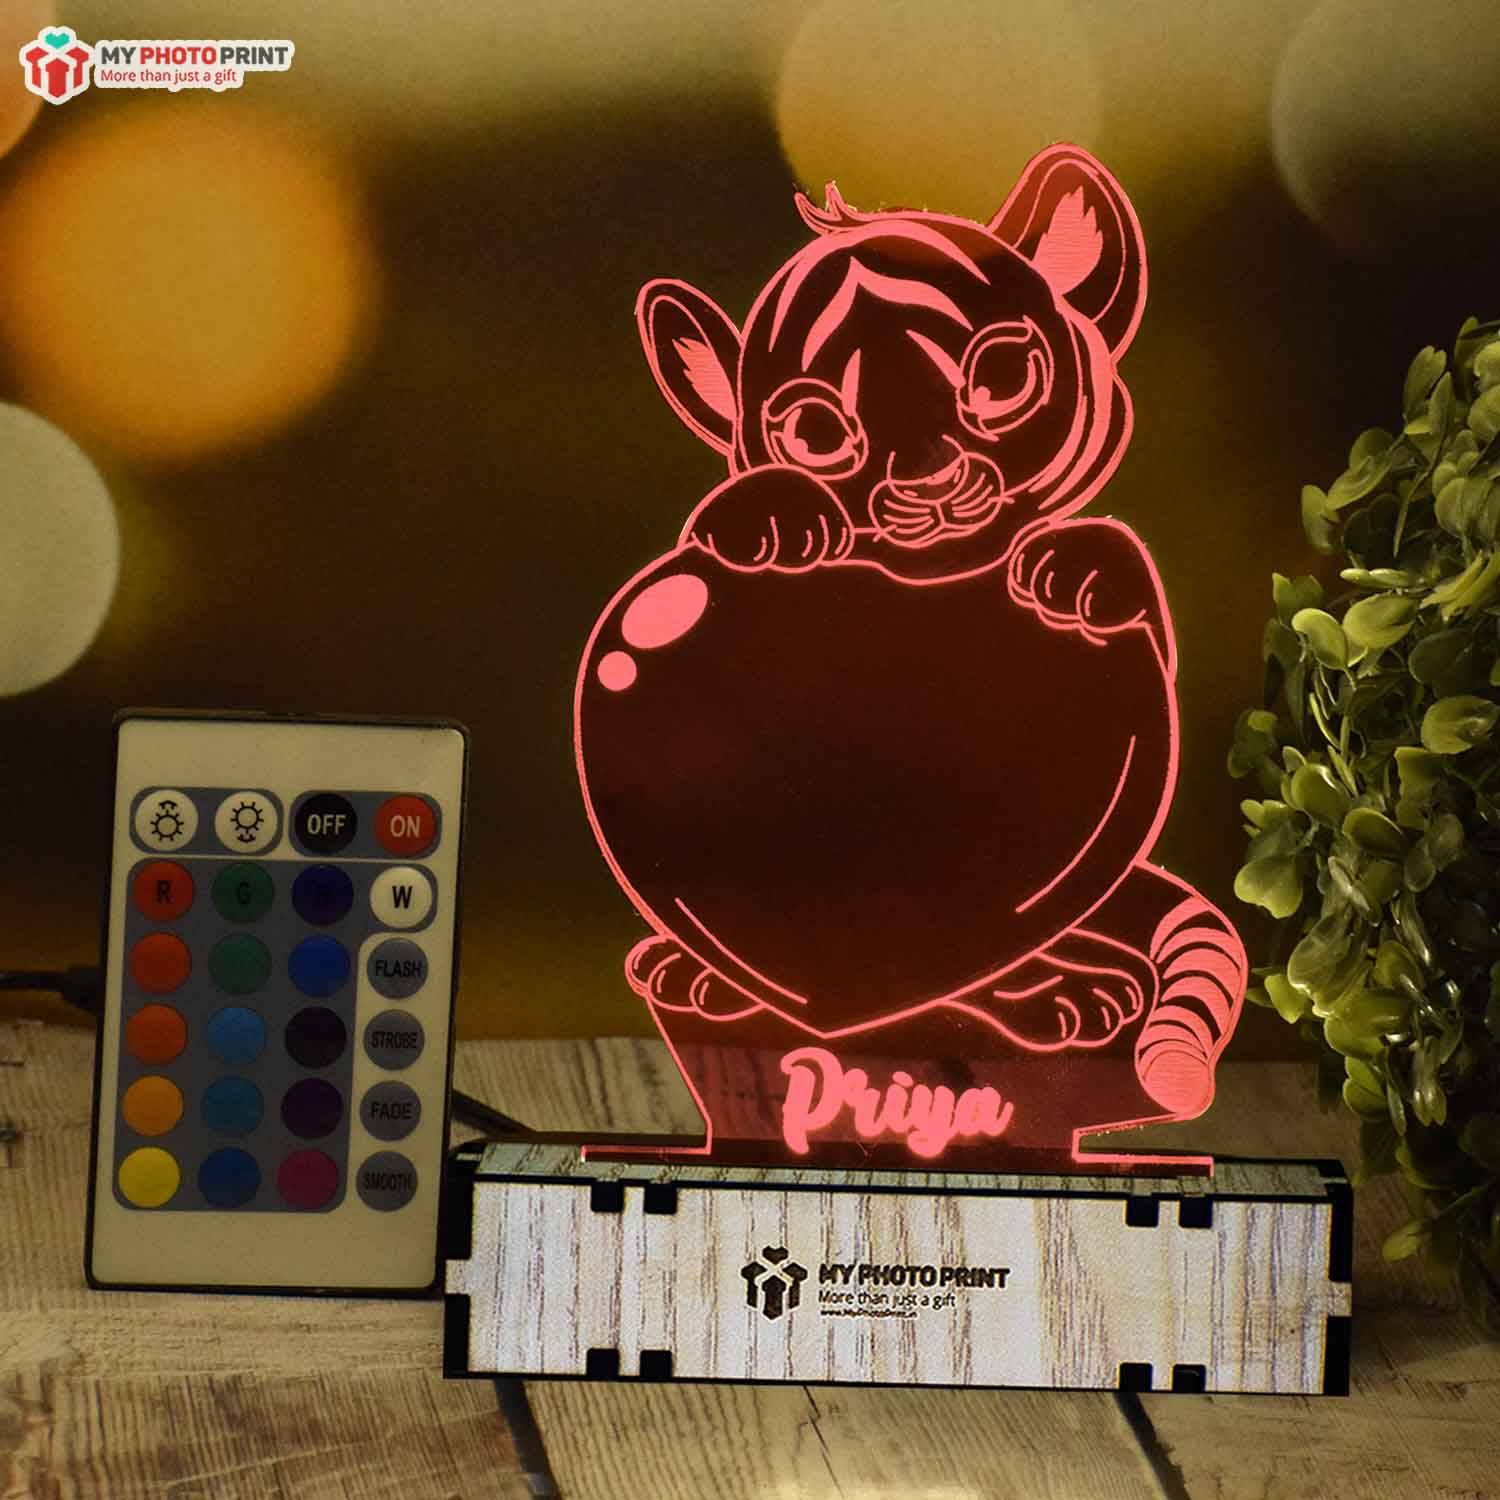 Personalized Simmba Acrylic 3D illusion LED Lamp with Color Changing Led and Remote# 1400